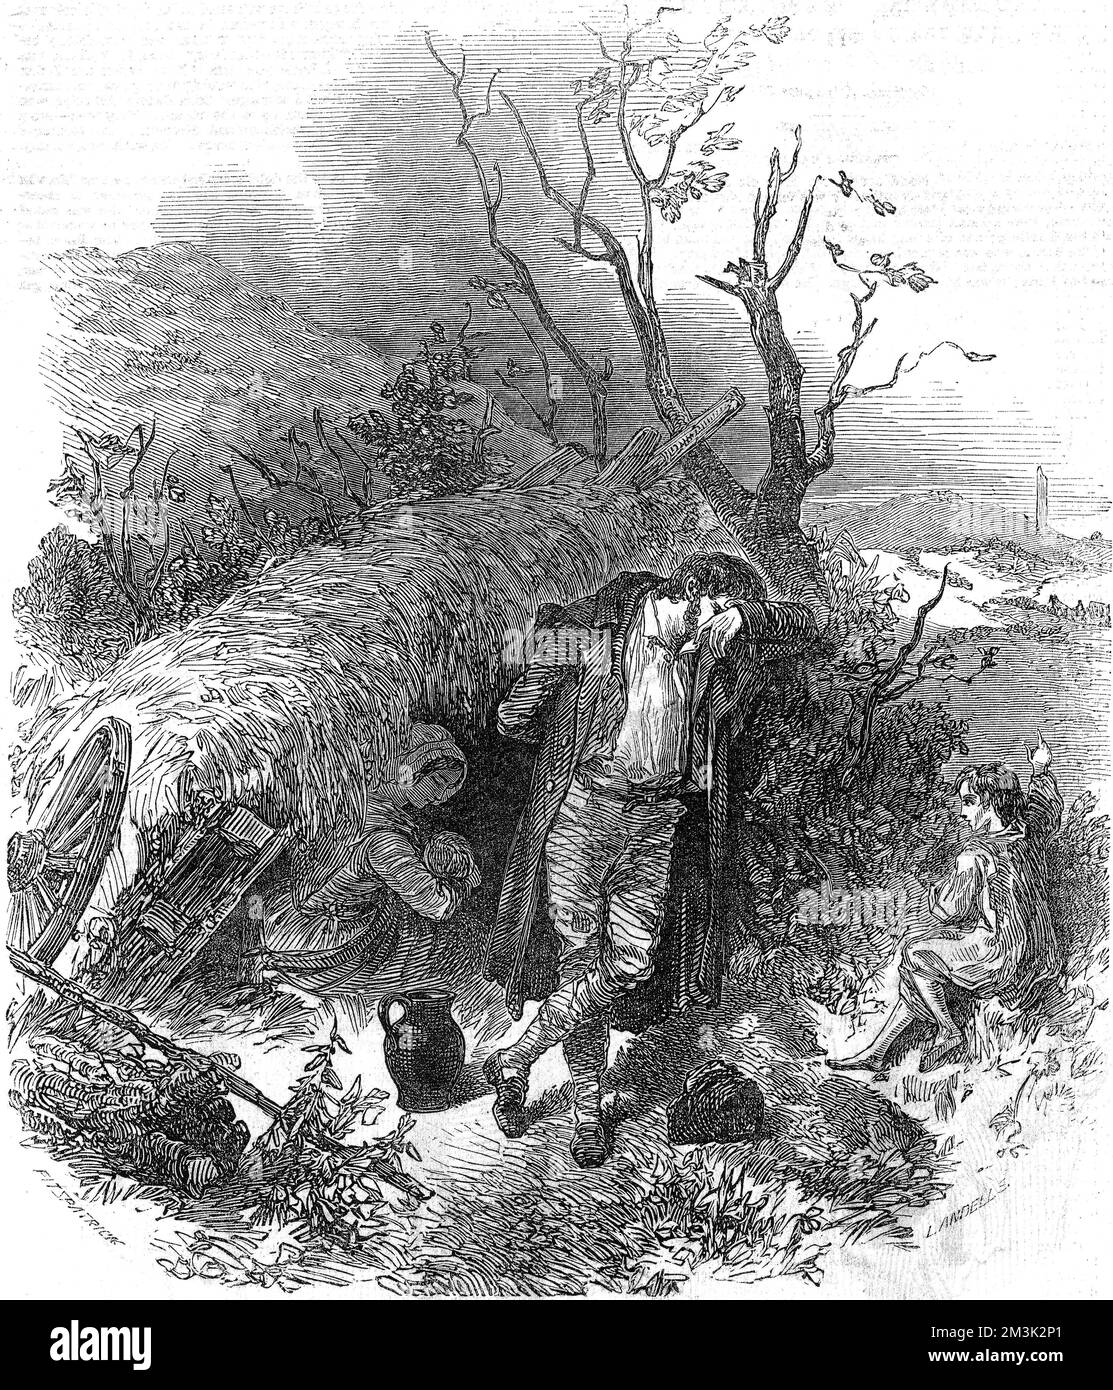 Irish peasant farming family the day after being evicted from their home during the time of the Irish Potato Famine. With few belongings, they seek shelter in some form of makeshift hovel. As landlords sought to rid their estates of pauperized farmers and labourers, as many as 500,000 people were evicted in the years from 1846 to 1854.  1848 Stock Photo